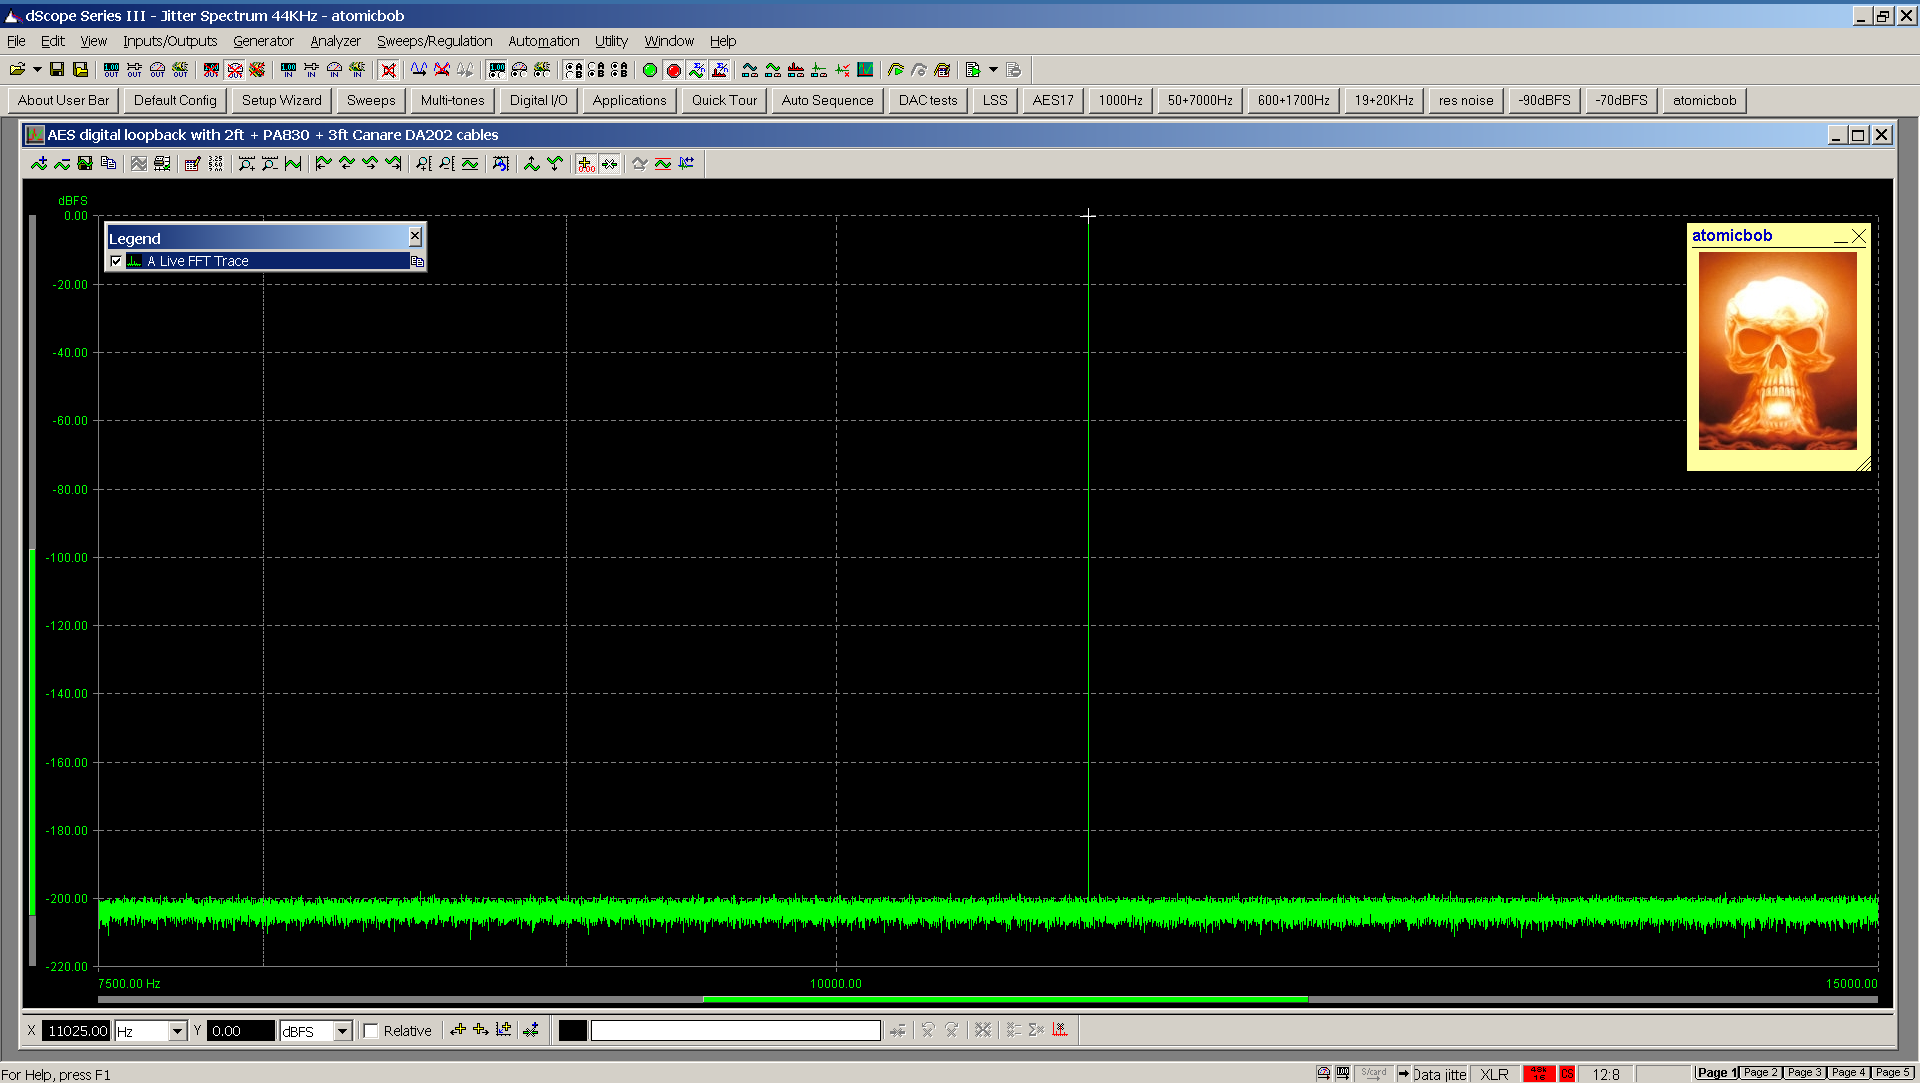 20201130 Inferred Jitter FFT - AES loopback 2ft + PA830 + 3ft Canare DA302 44KHz.png